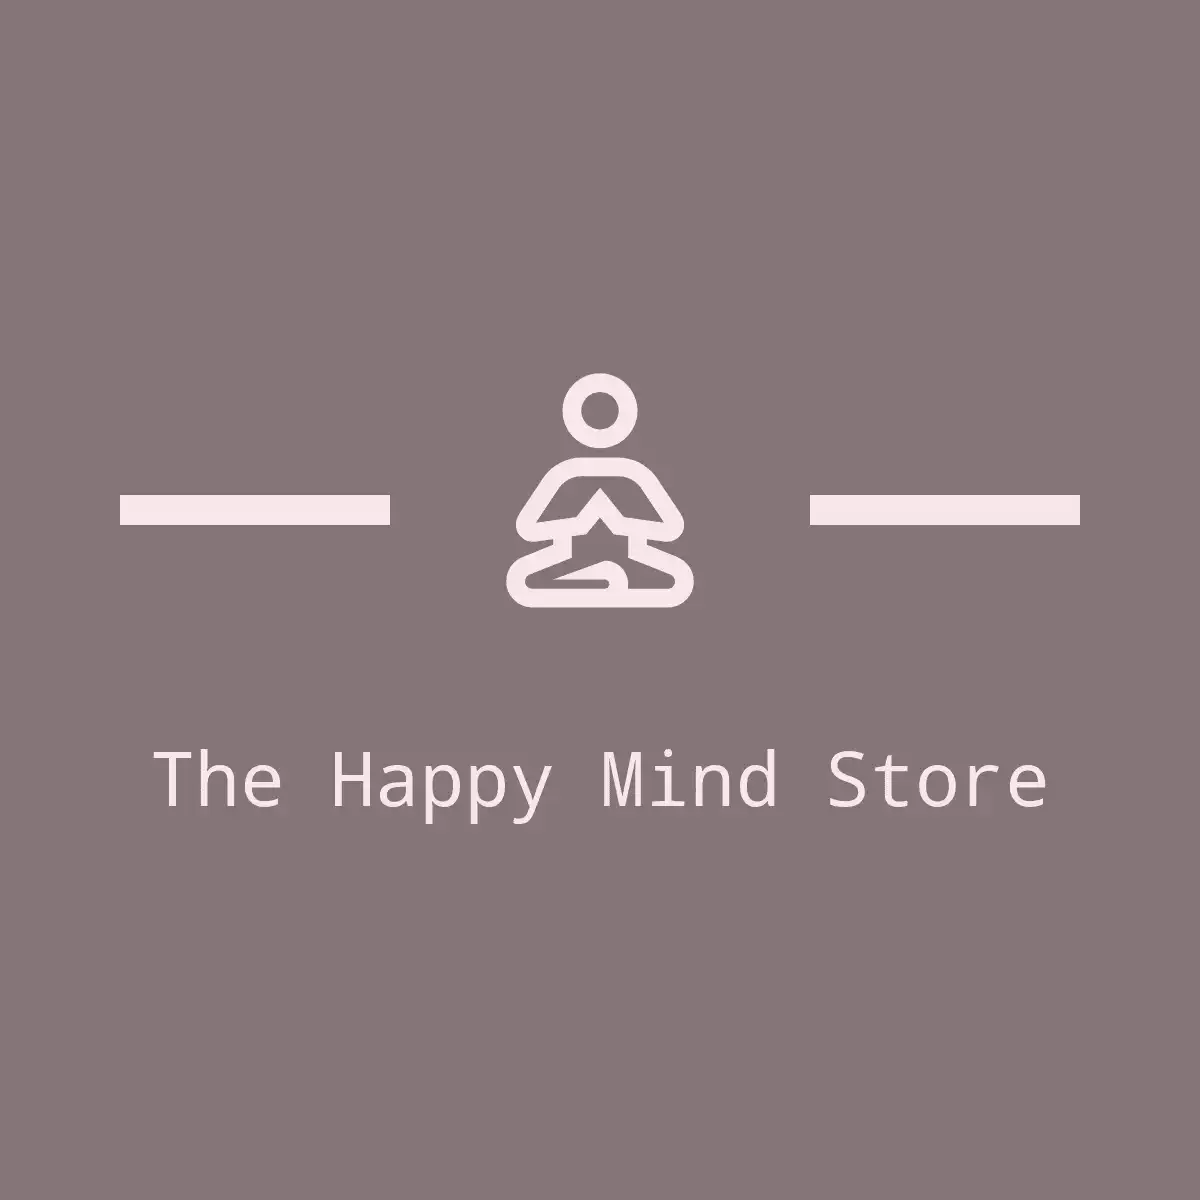 The Happy Mind Store